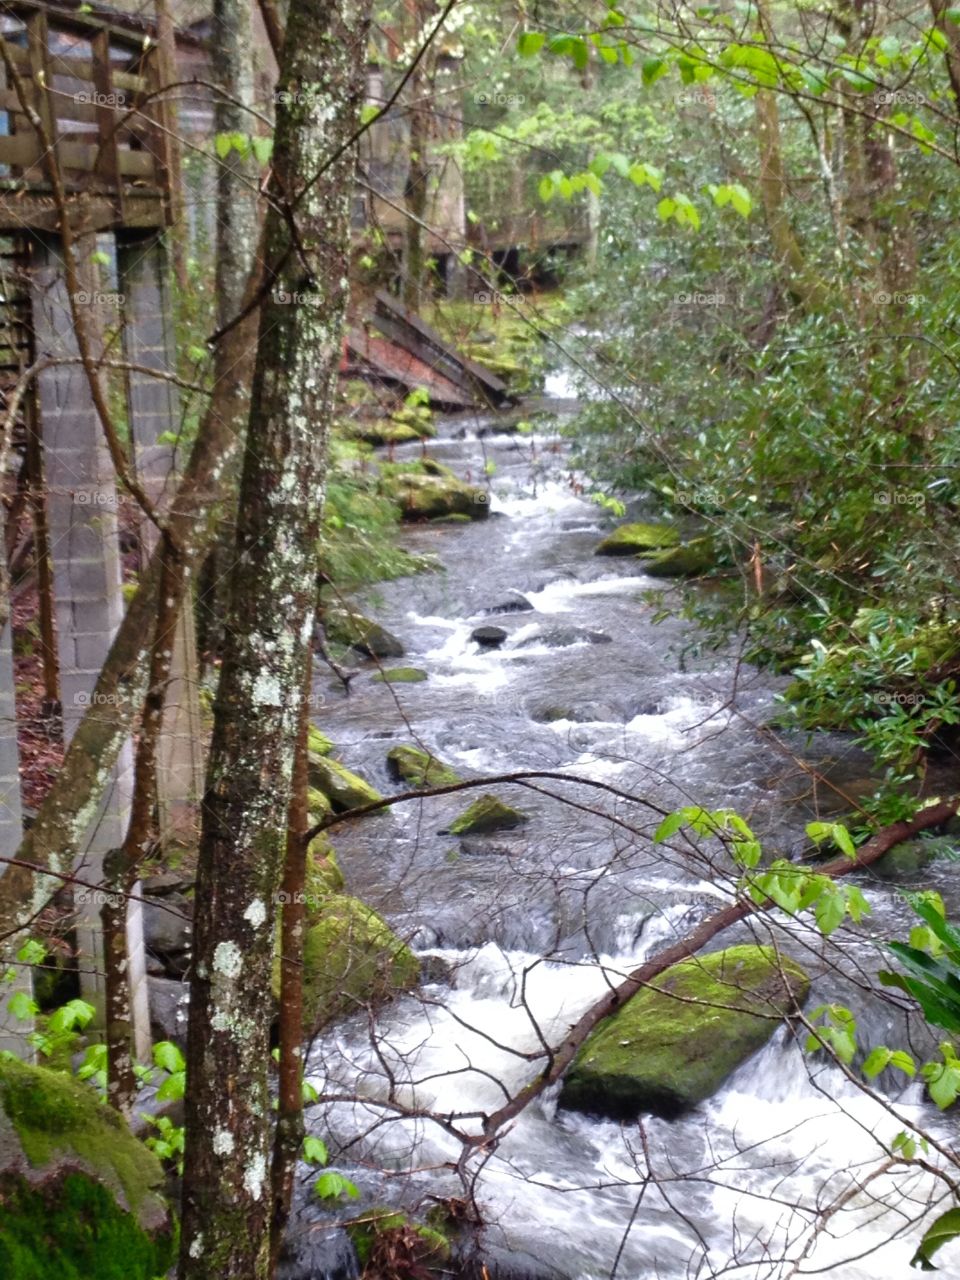 View of stream flowing through rock